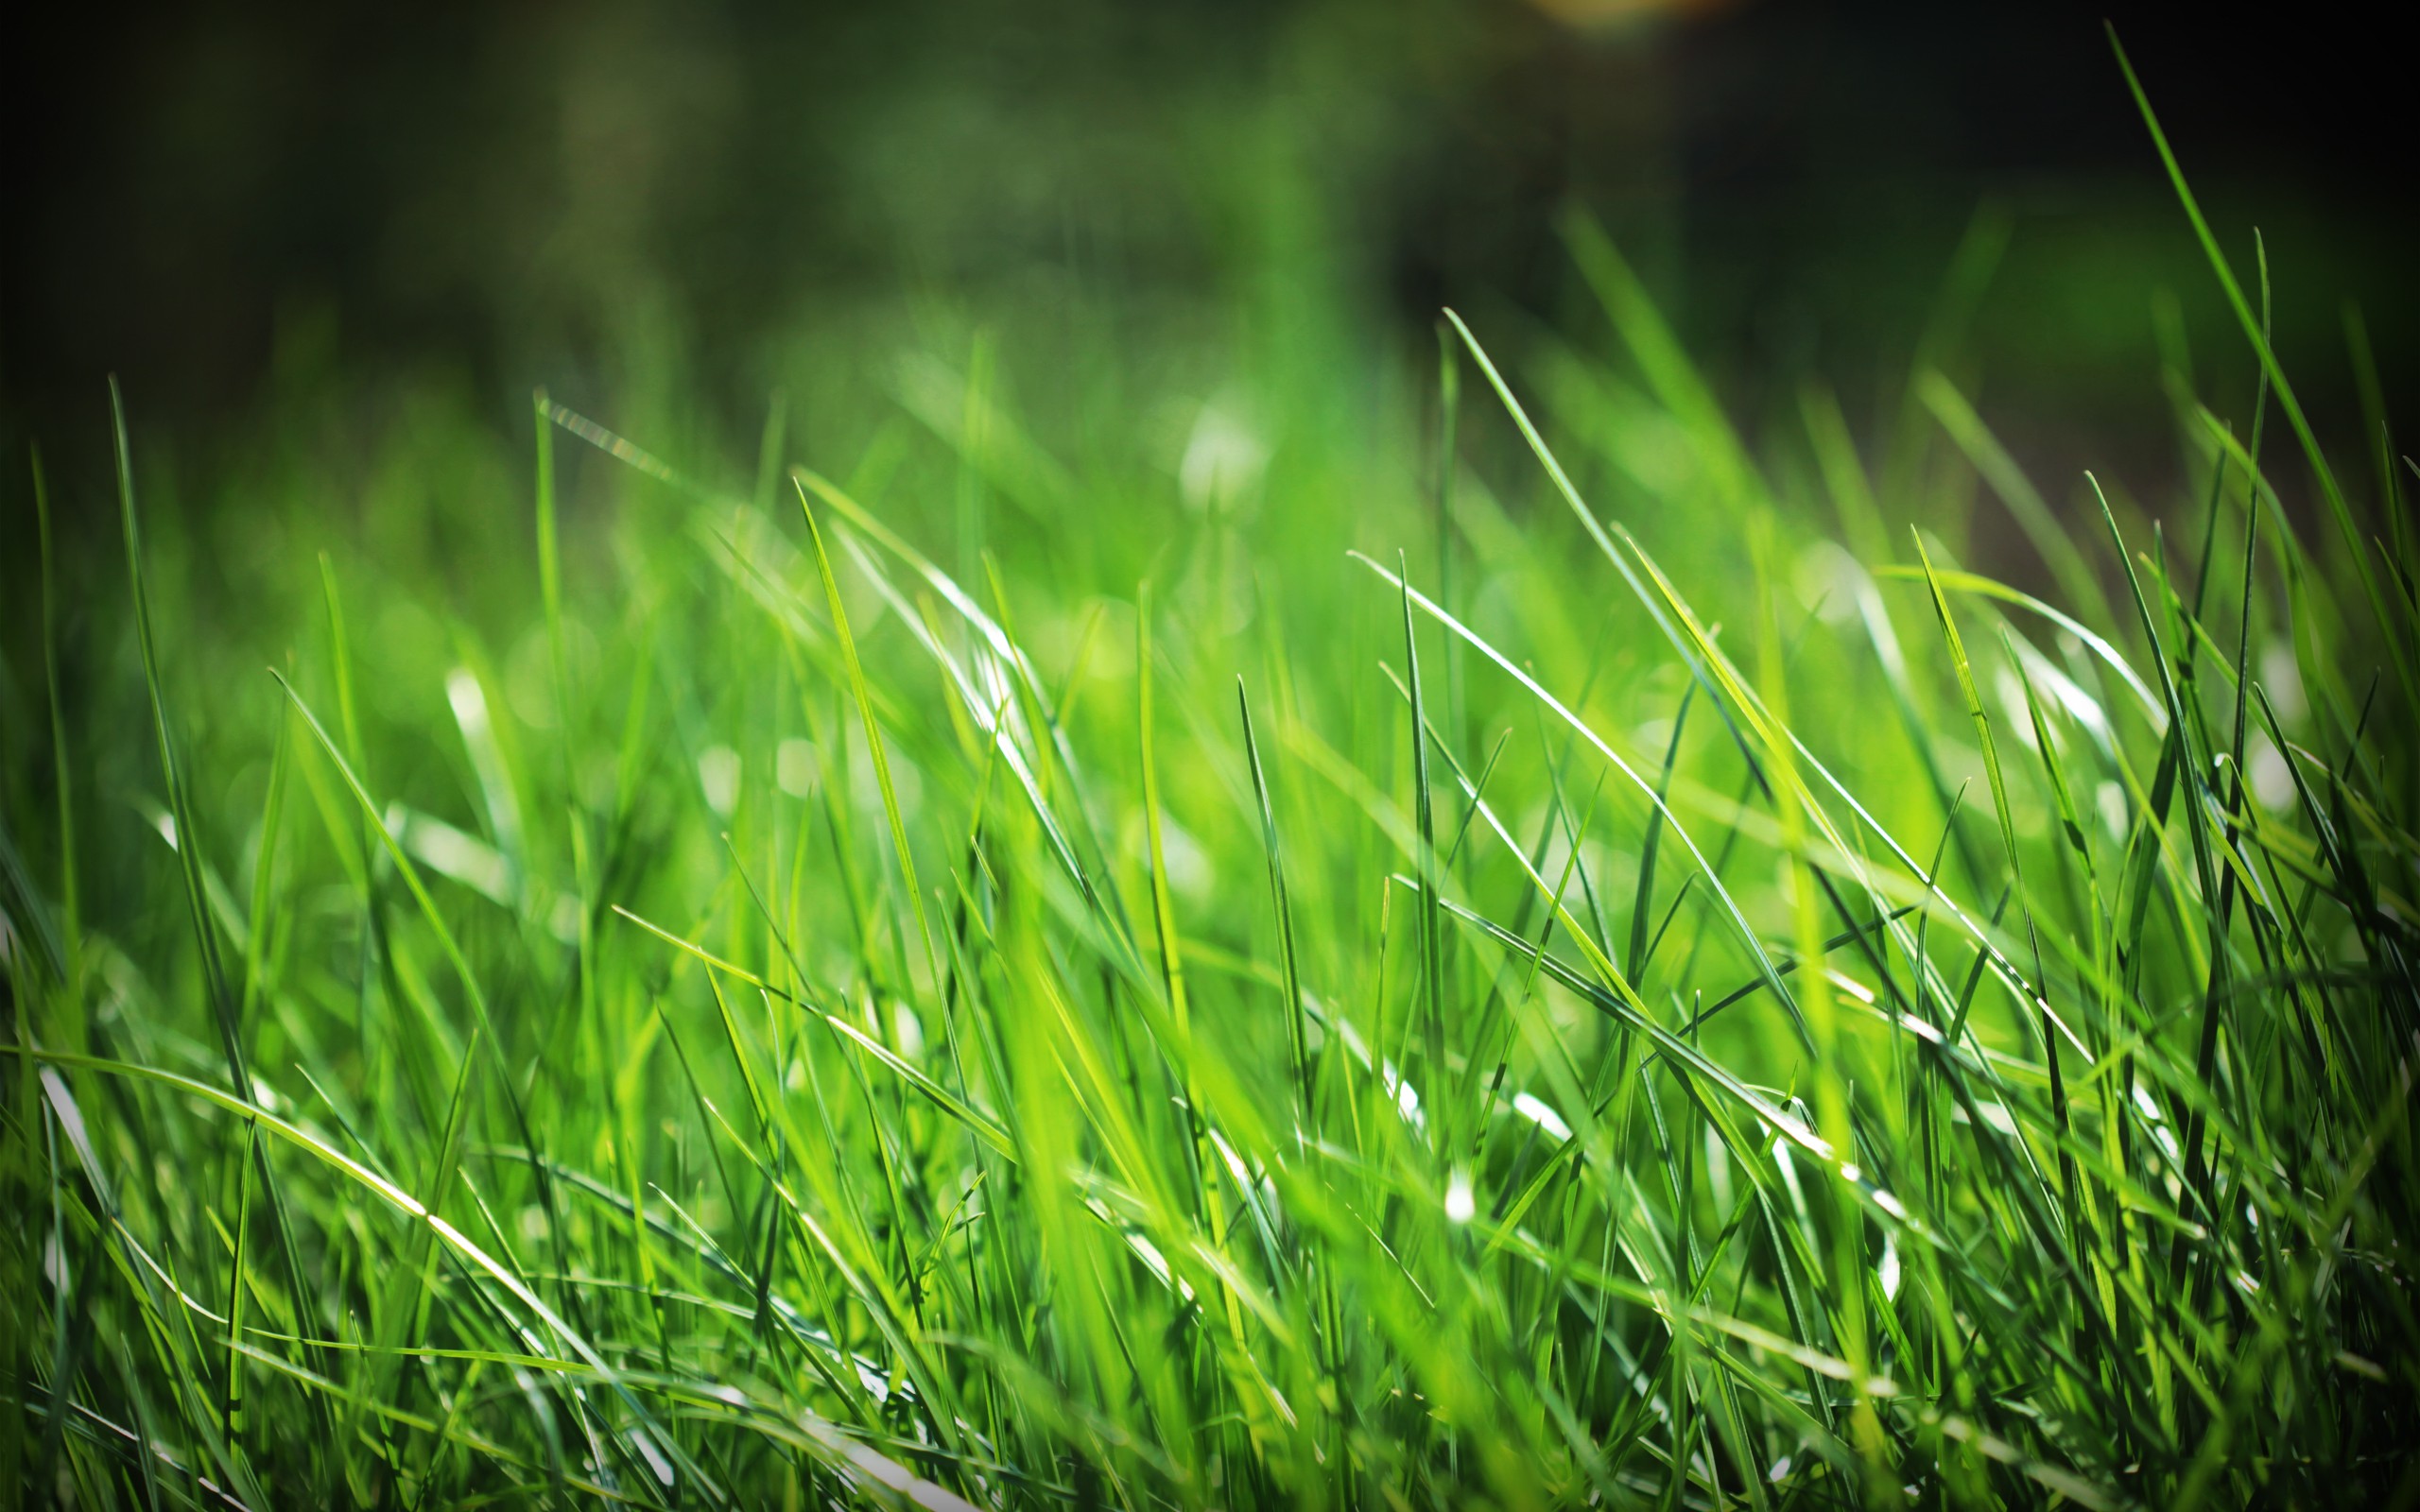 green-grass-hd-wallpapers-free-download-nature-images | KG Landscape ...